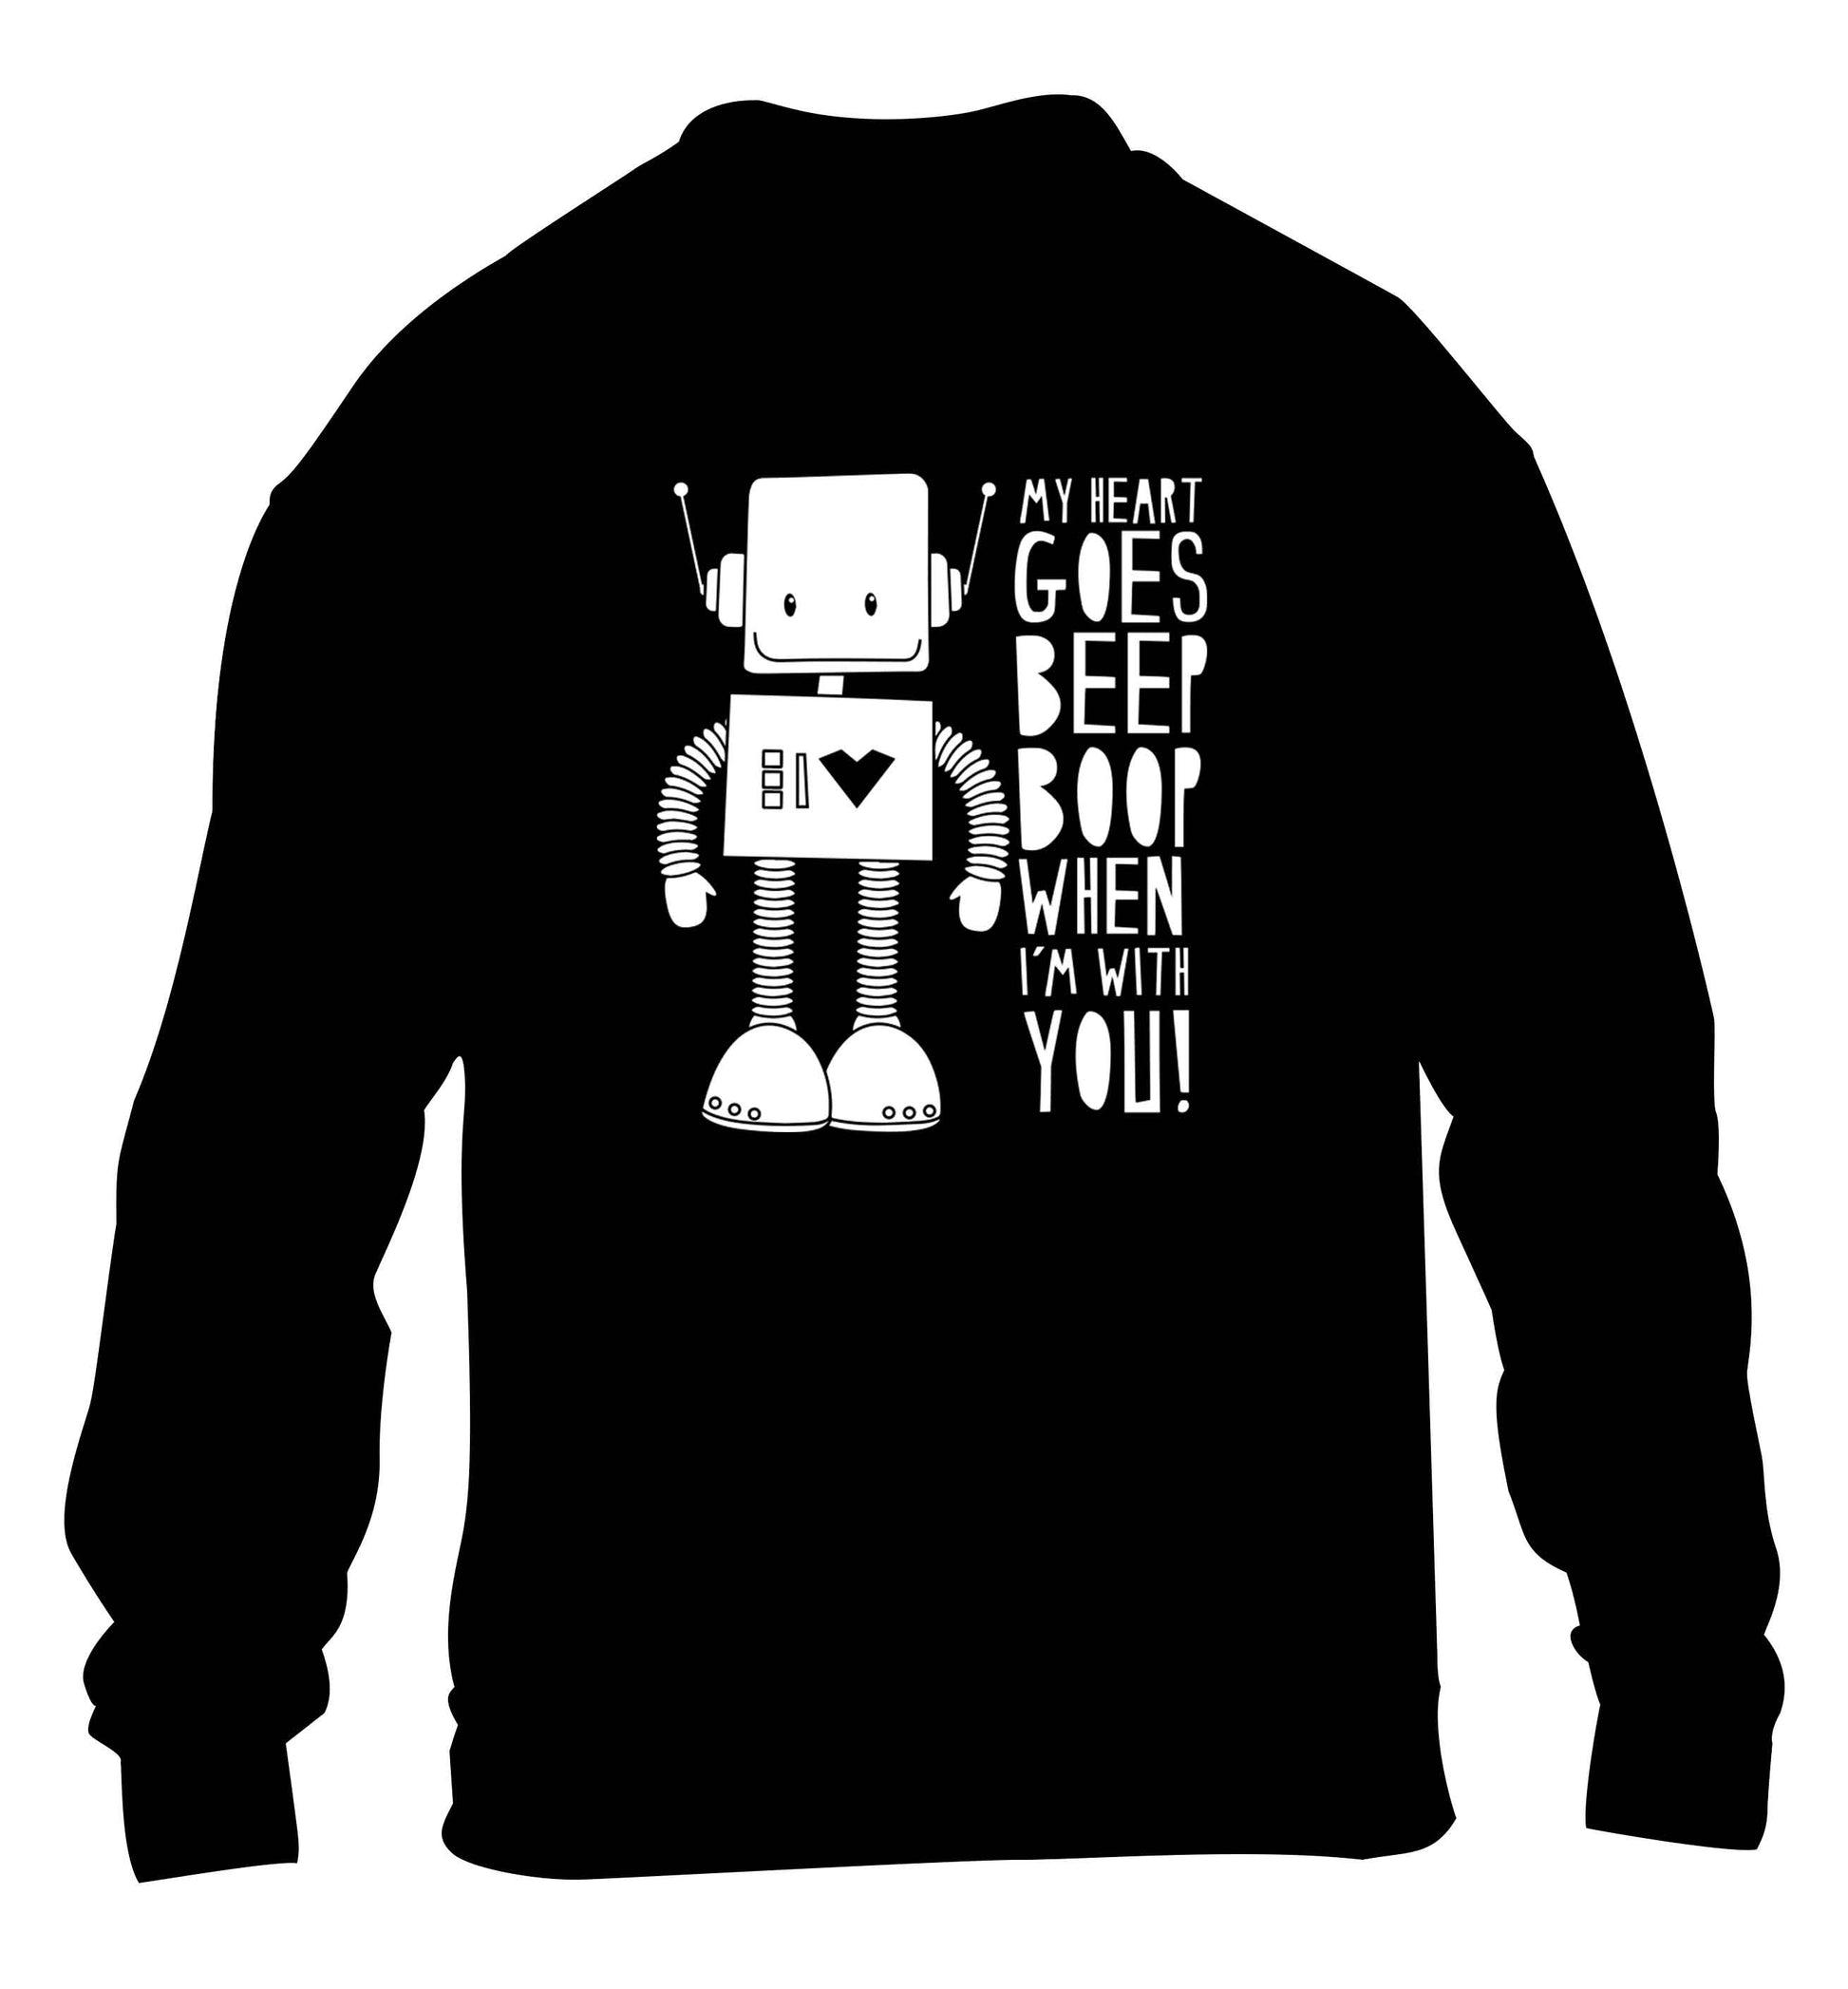 My heart goes beep boop when I'm with you children's black sweater 12-13 Years